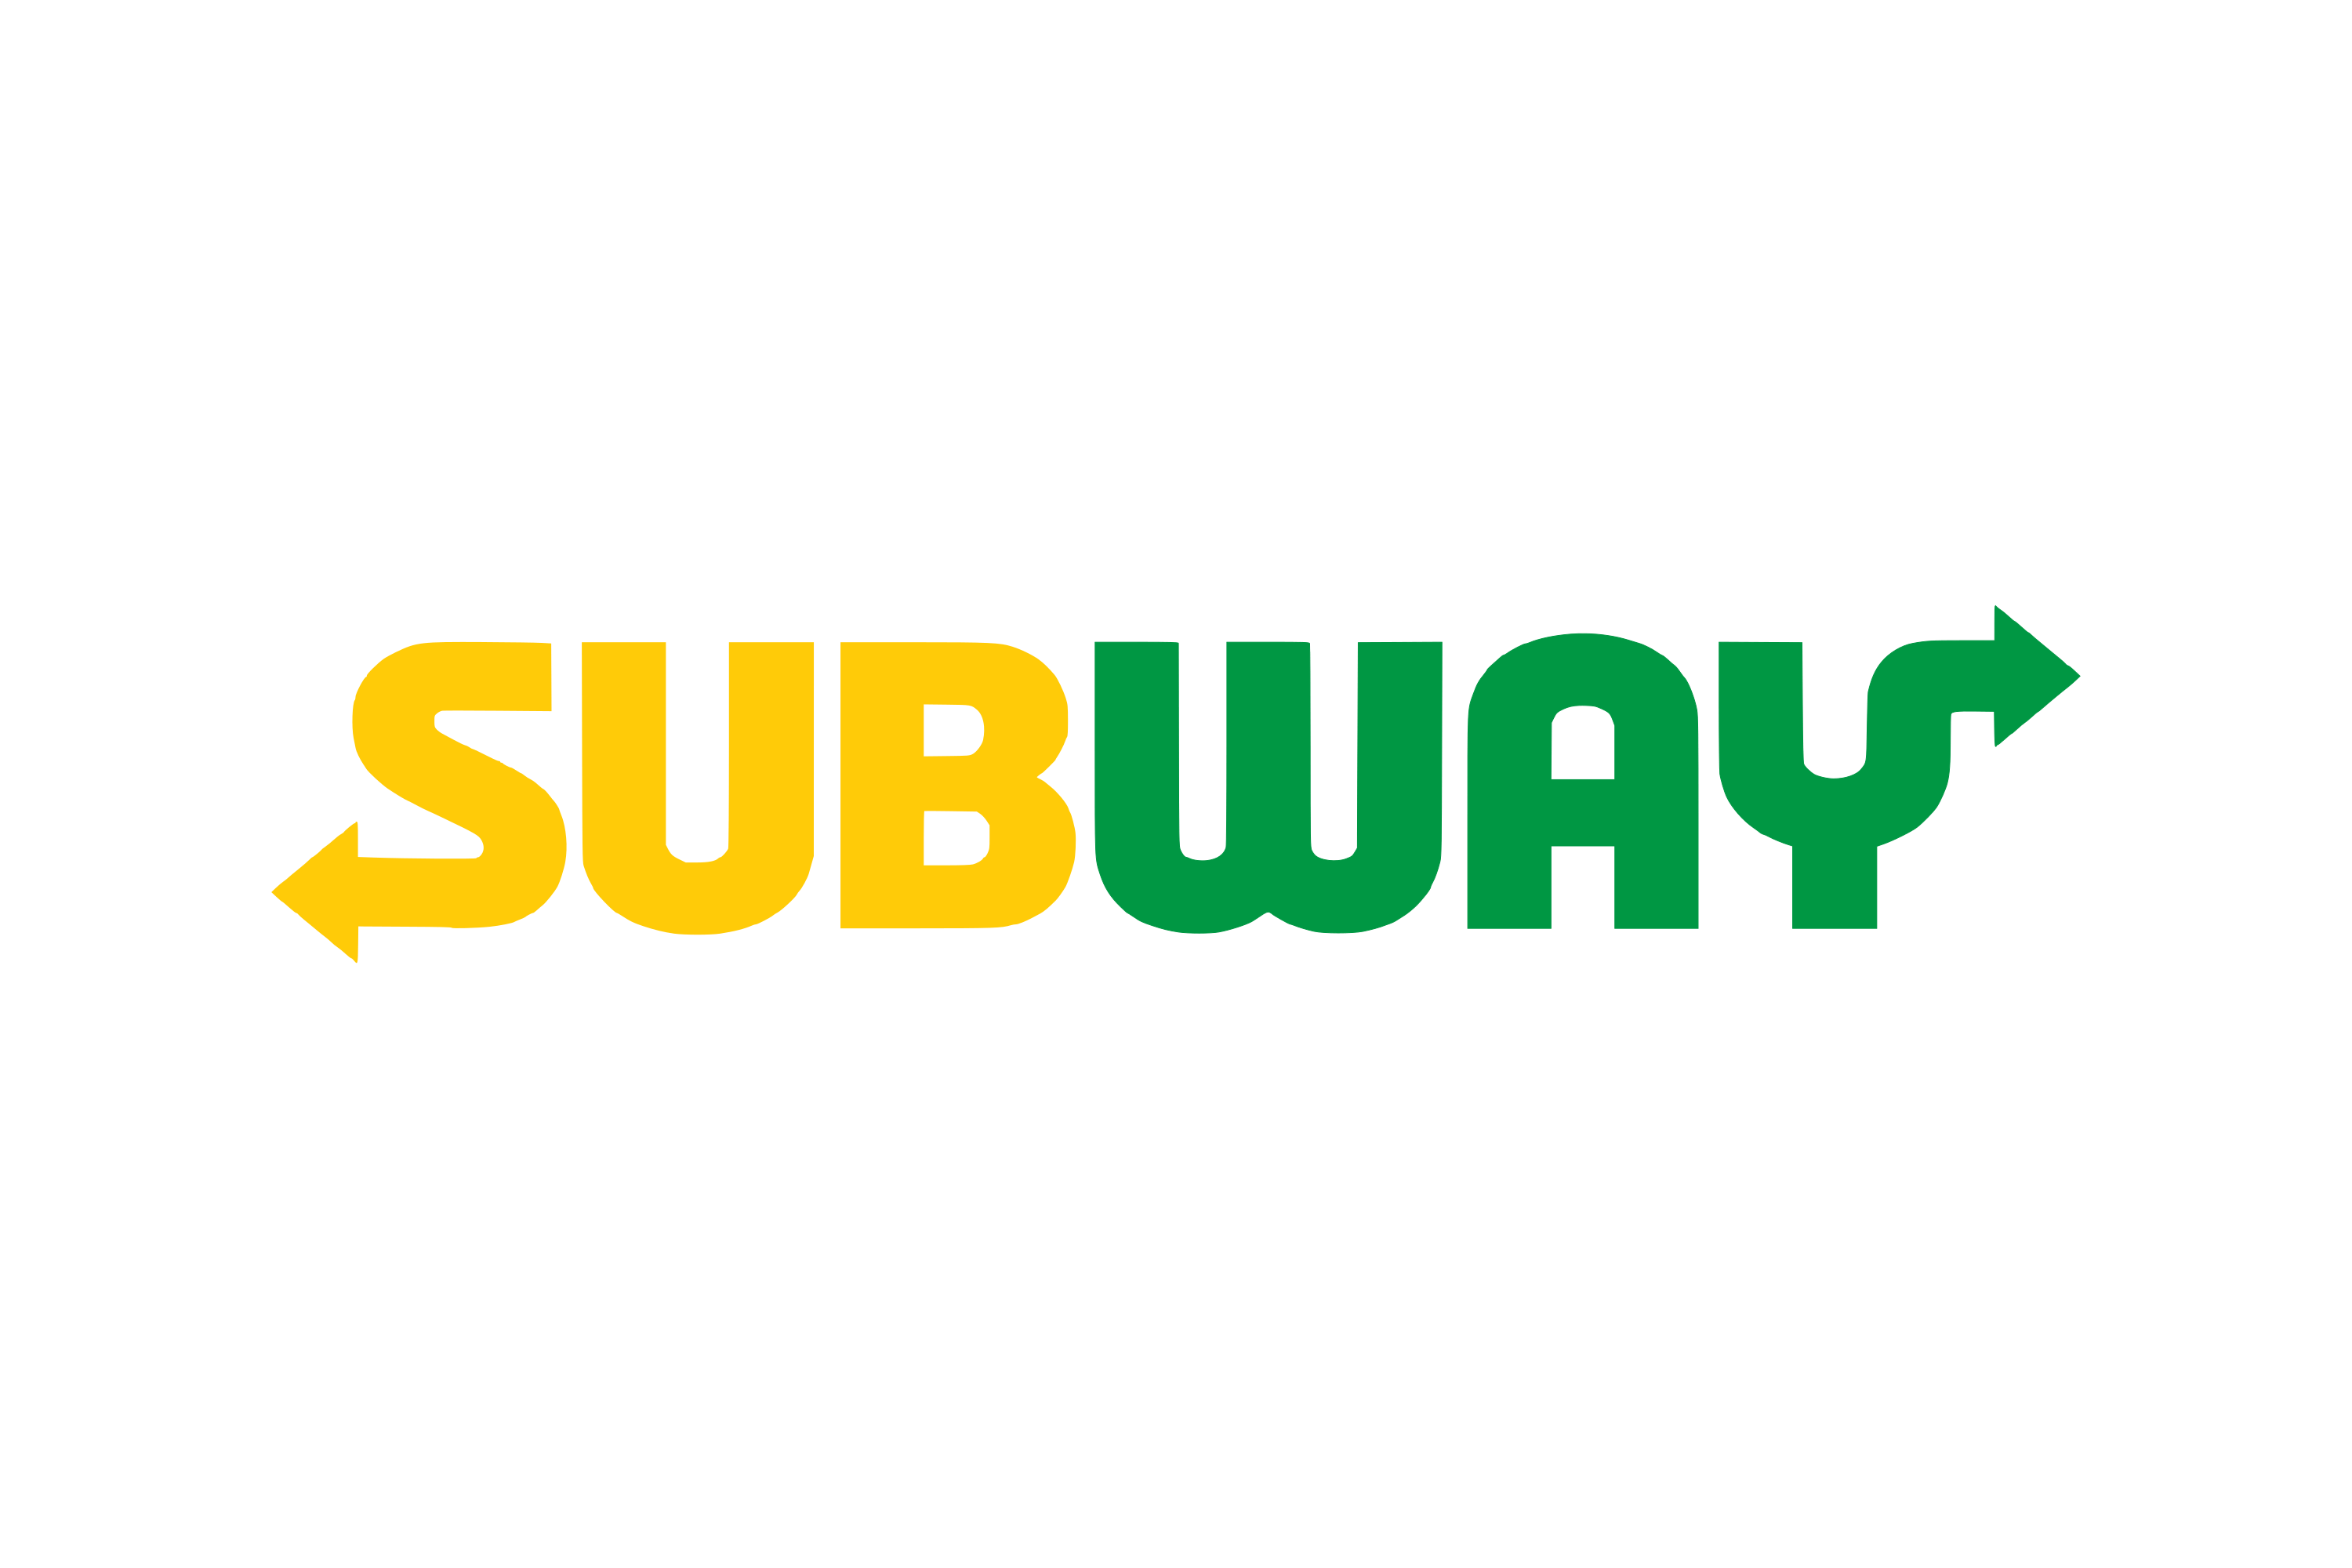 Download Subway Logo In Svg Vector Or Png File Format   Logo.wine - Subway, Transparent background PNG HD thumbnail